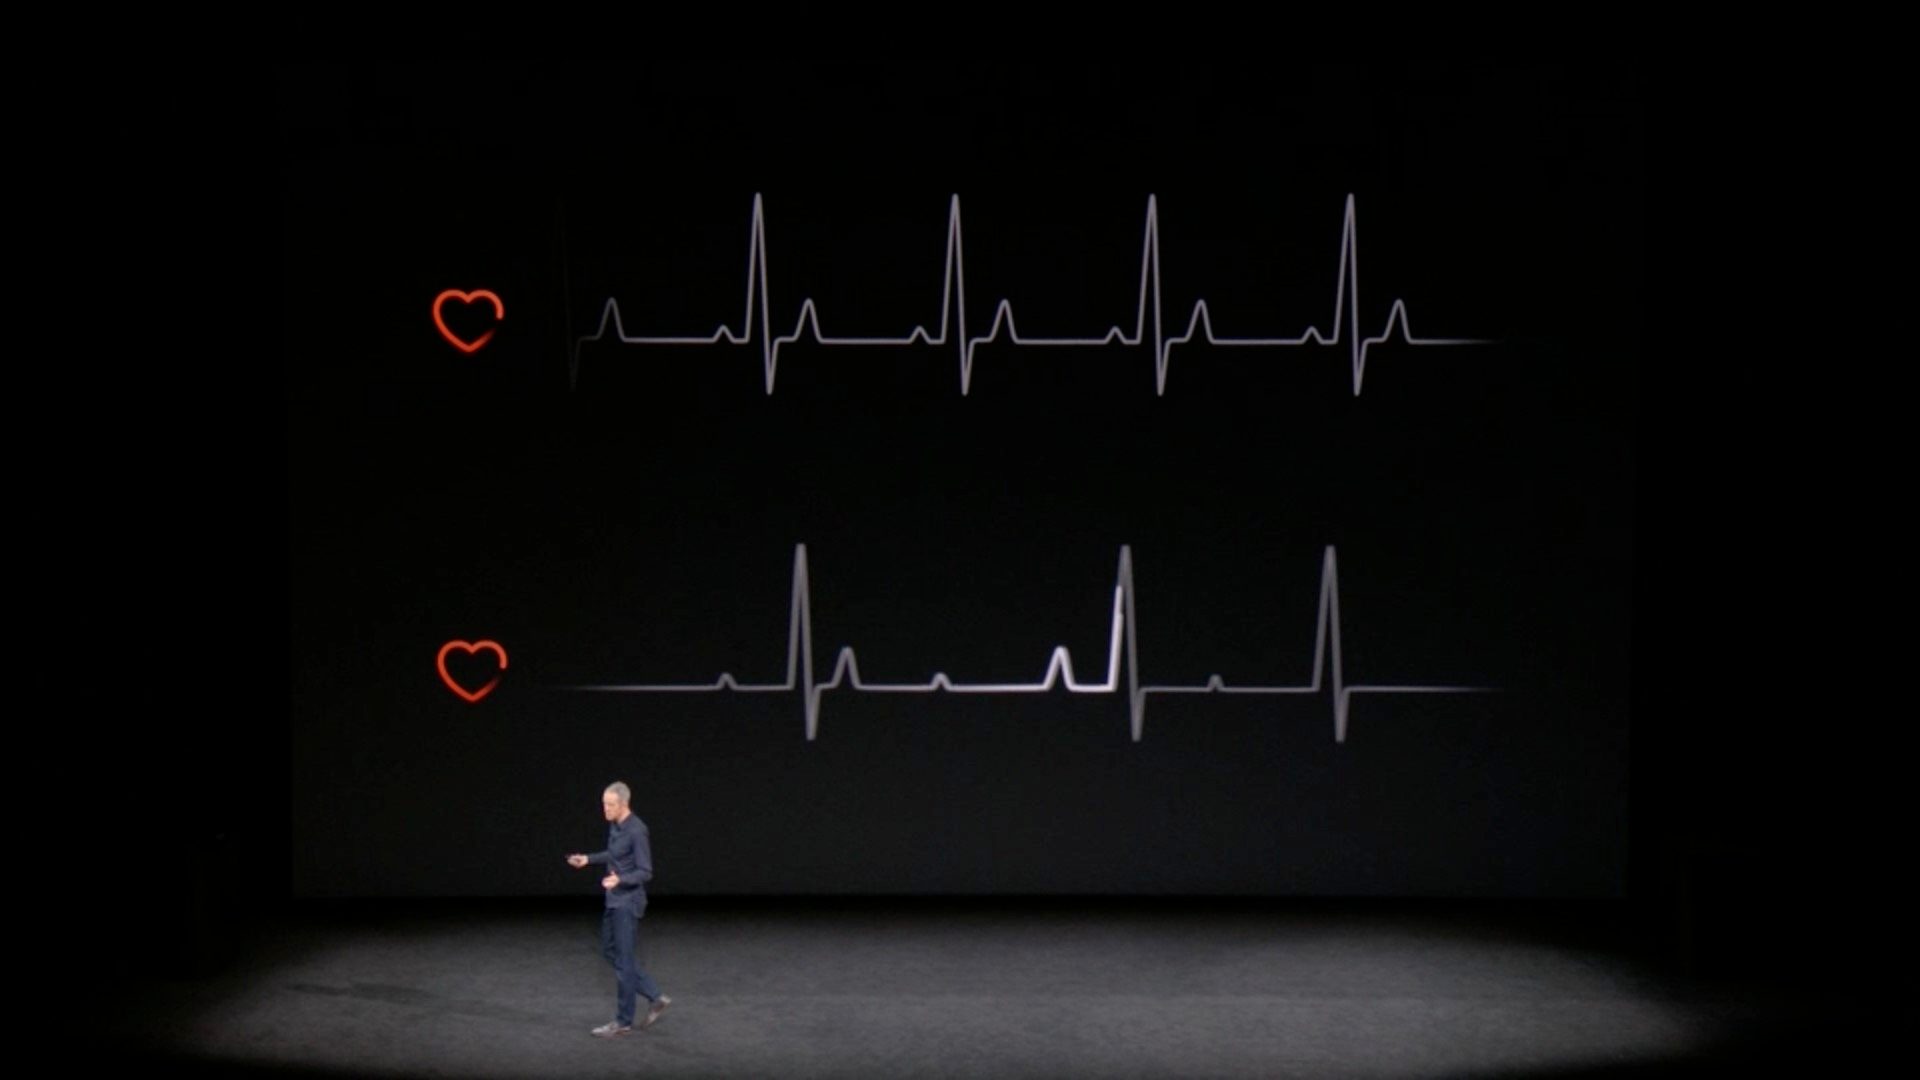 Apple Just Received a Fast Lane for Developing Health Features